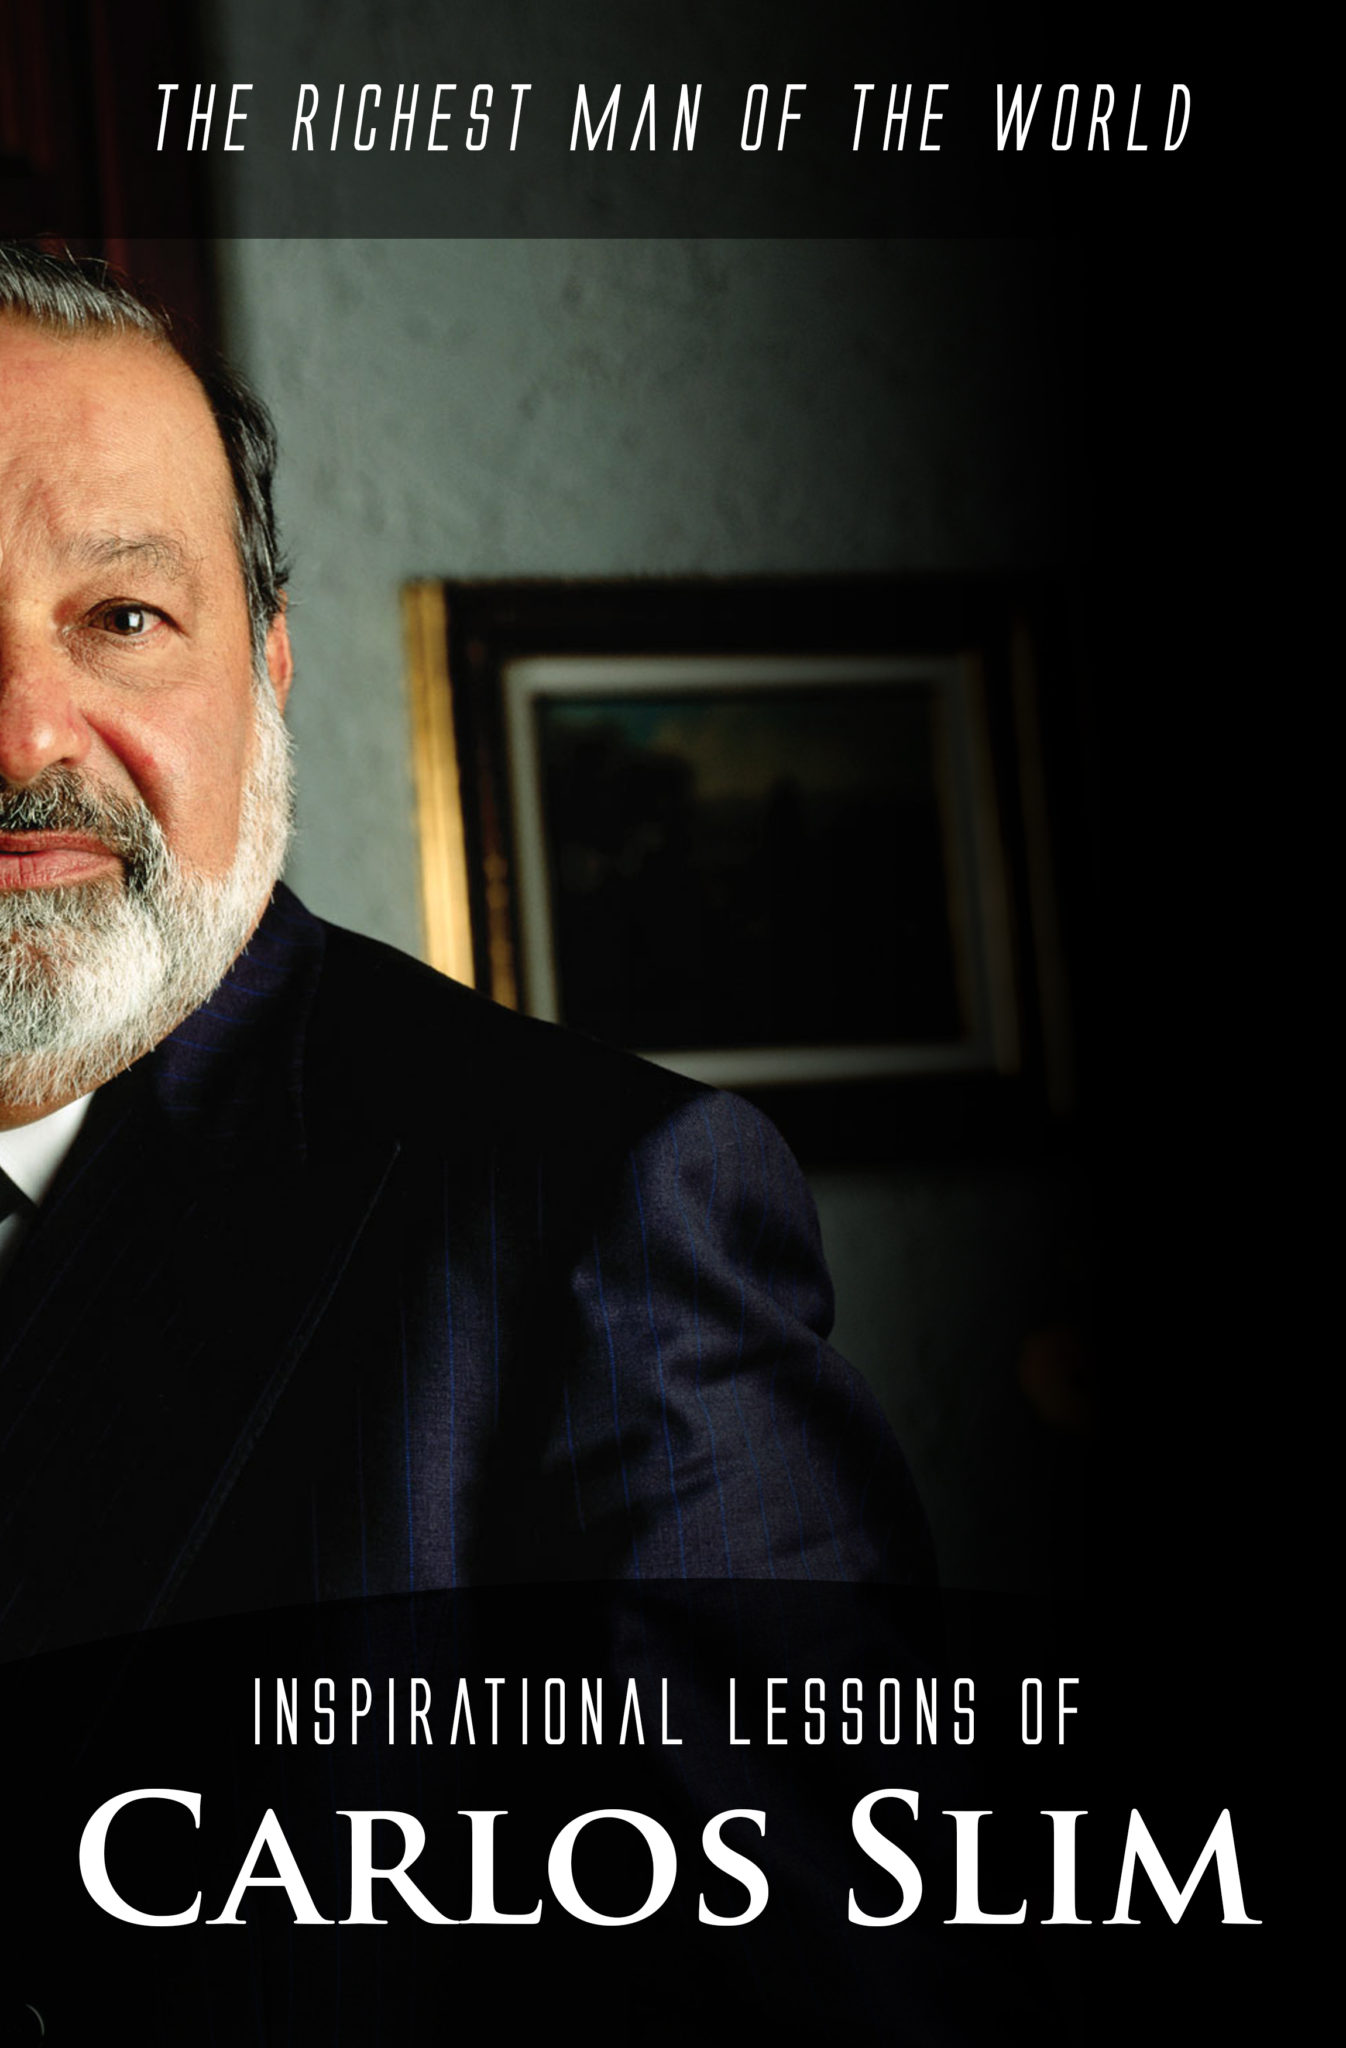 Inspirational Lessons of Carlos Slim: The Richest Man of the World by Tiffany Barker